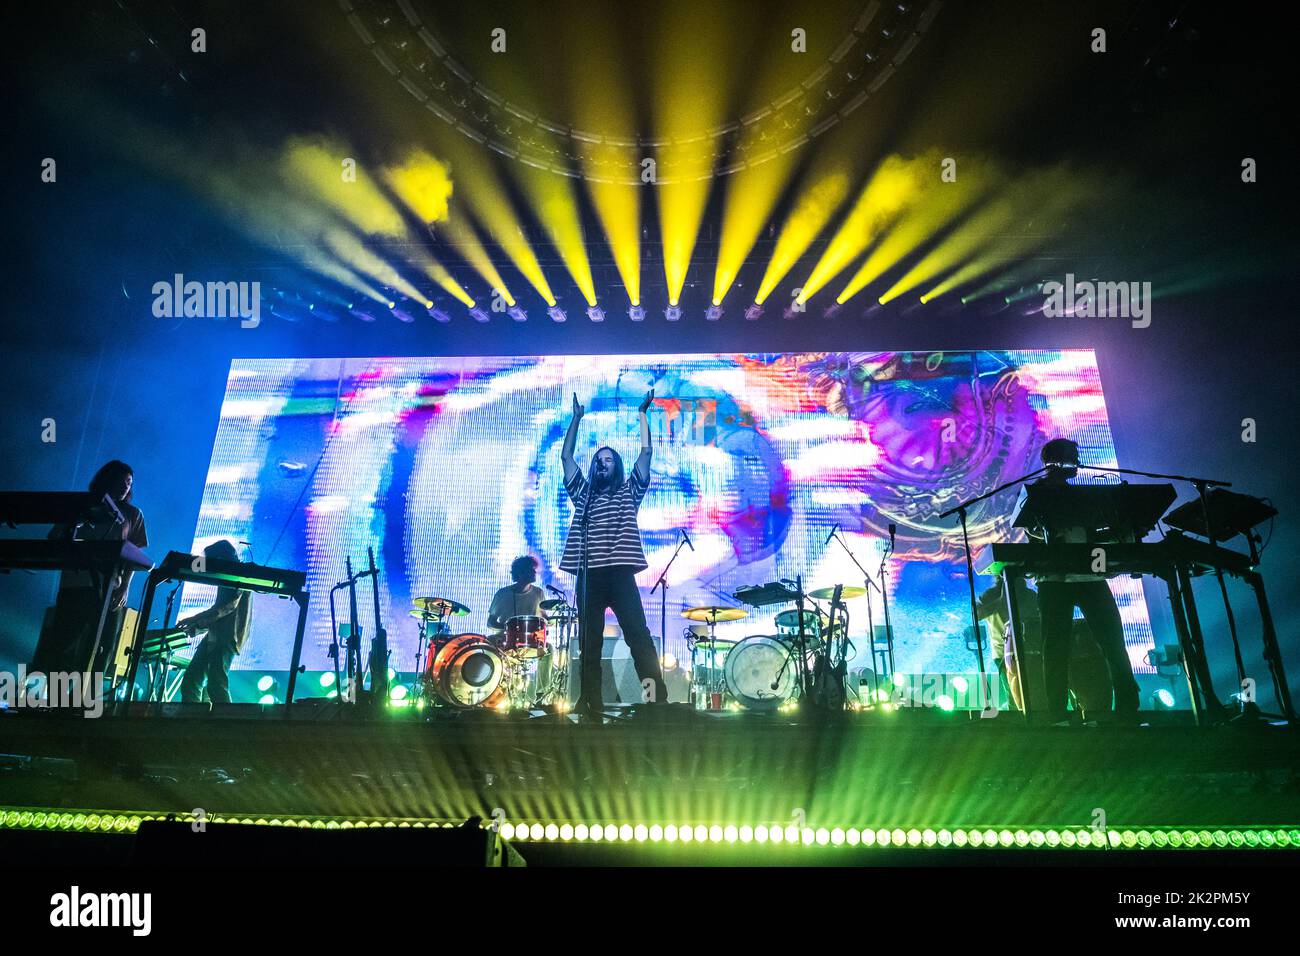 Copenhagen, Denmark. 22nd, August 2022. The Australian band Tame Impala performs a live concert Royal Arena in Copenhagen. Here singer and musician Kevin Parker is seen live on stage. (Photo credit: Gonzales Photo - Bo Kallberg). Stock Photo